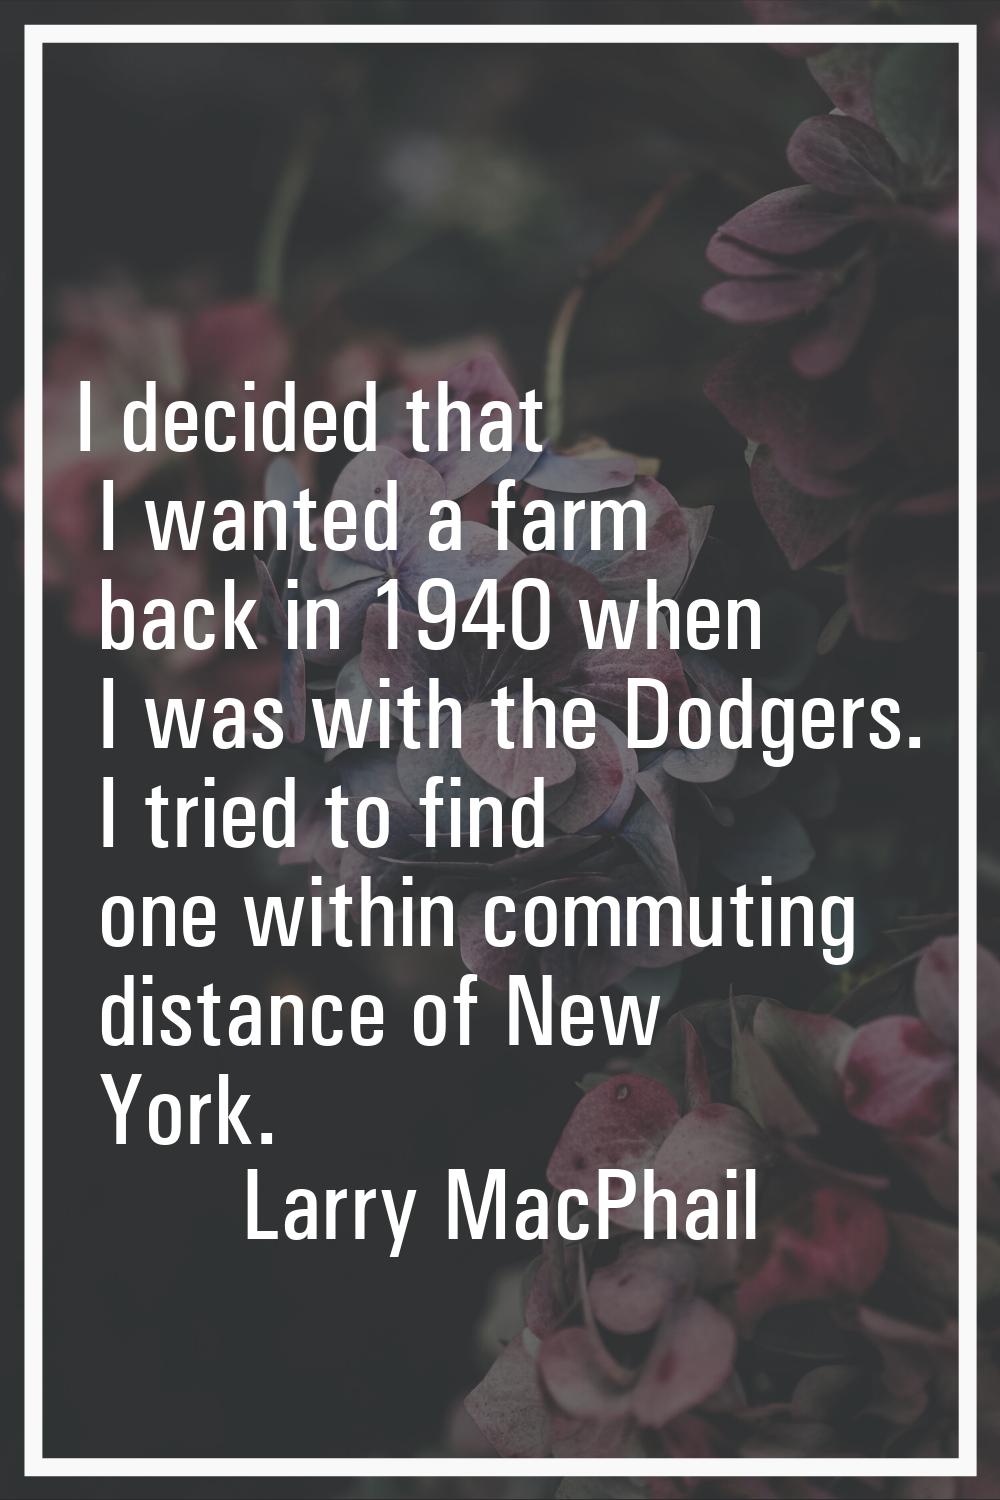 I decided that I wanted a farm back in 1940 when I was with the Dodgers. I tried to find one within